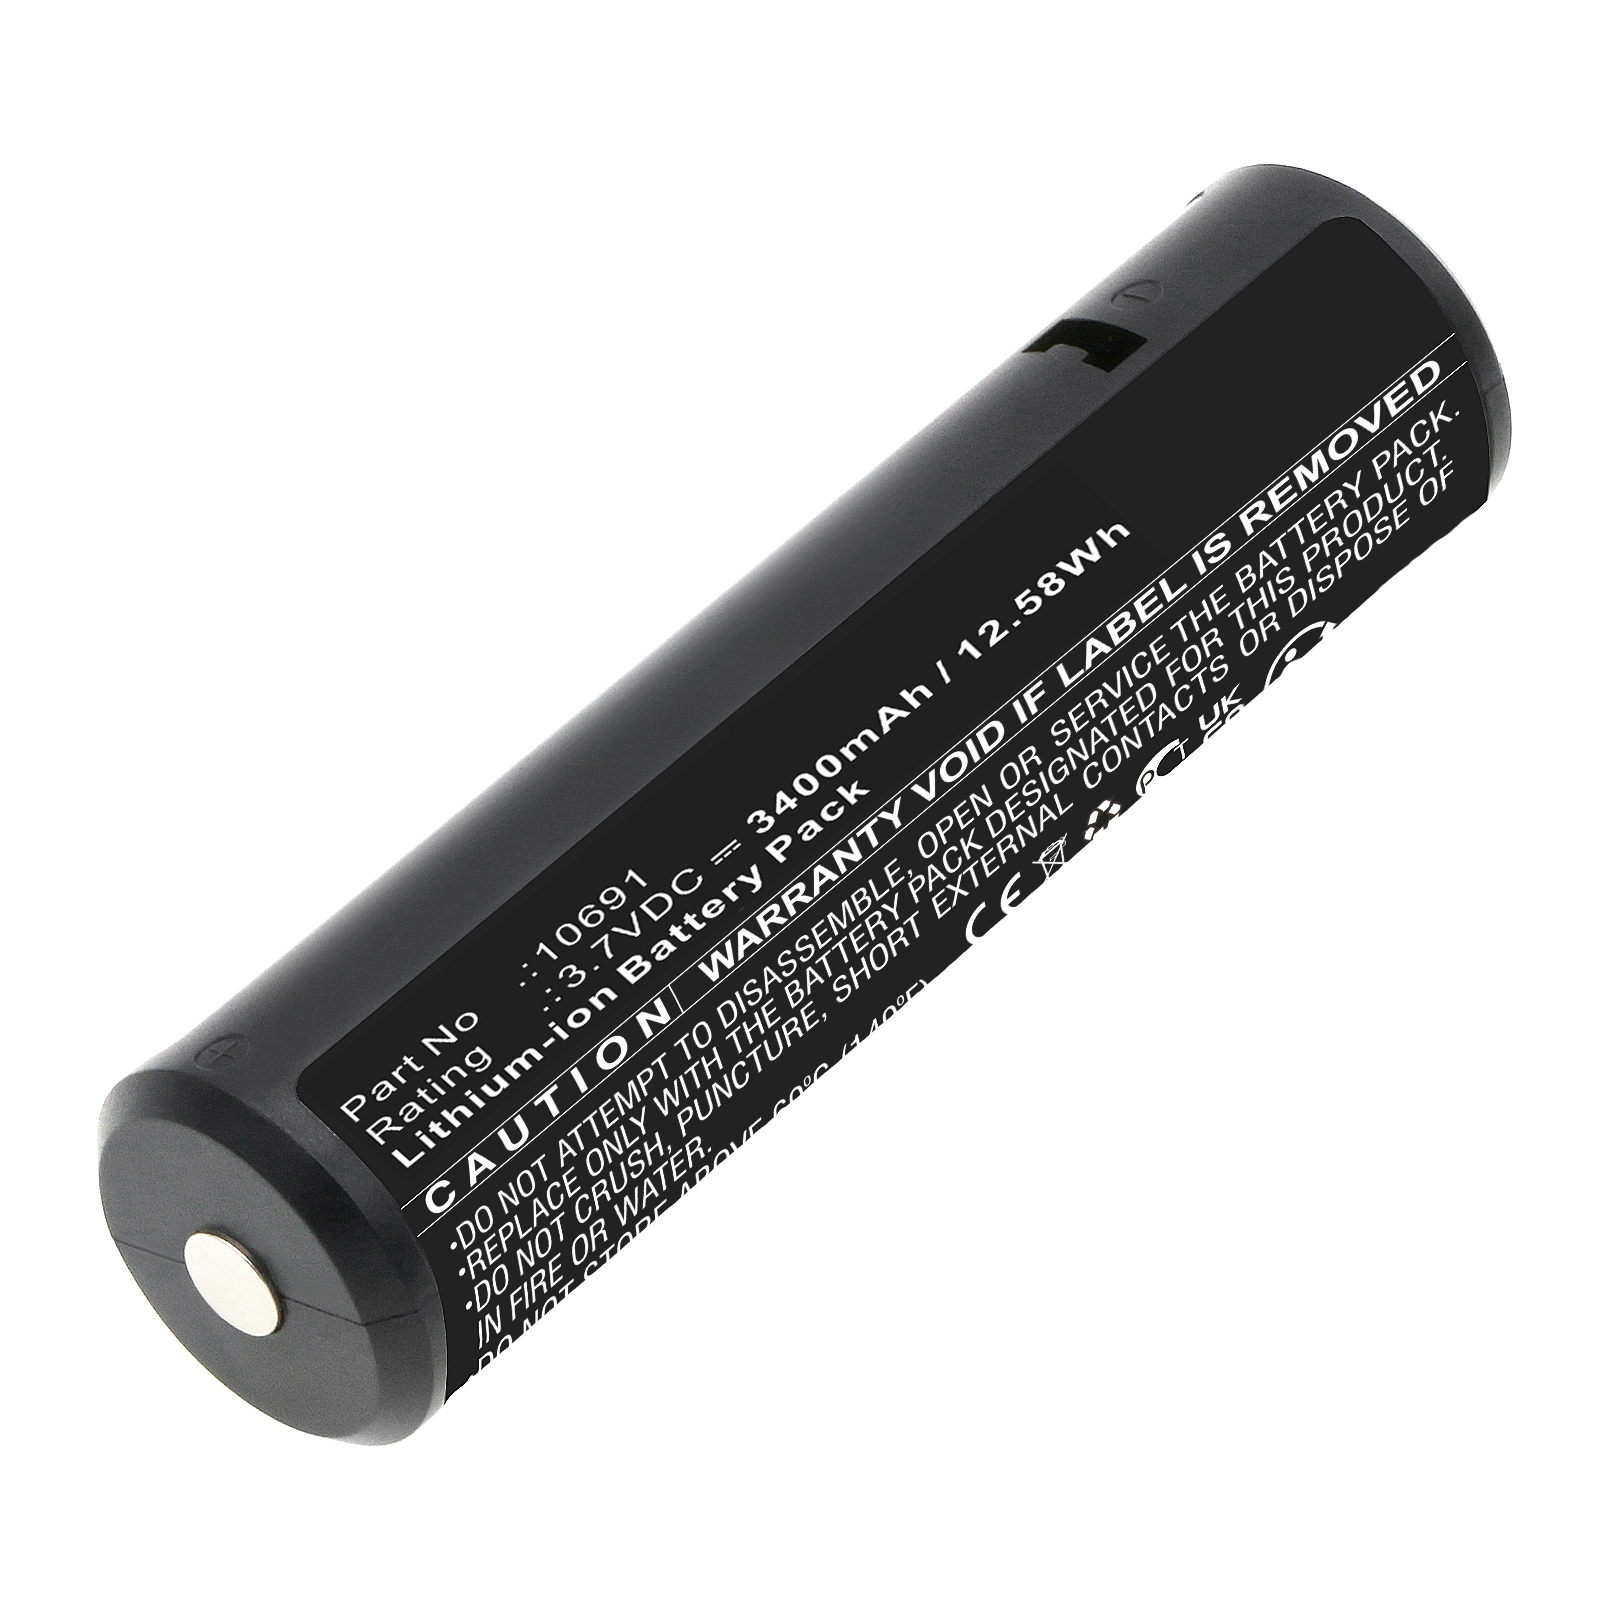 Synergy Digital Medical Battery, Compatible with Riester 10691 Medical Battery (Li-Ion, 3.7V, 3400mAh)